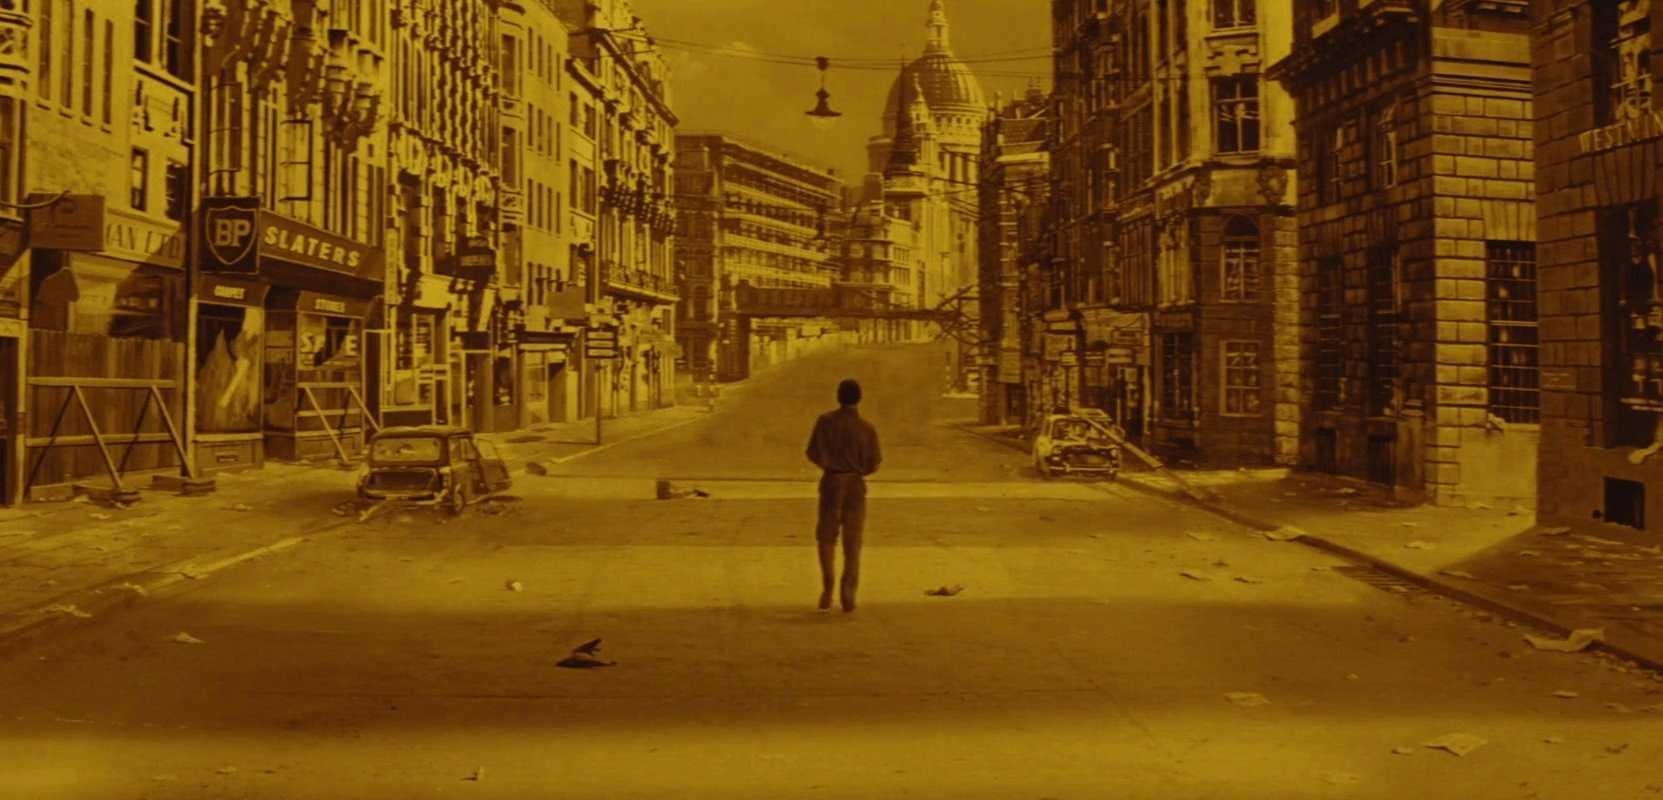 London in the midst of a heatwave in The Day the Earth Caught Fire (1961)